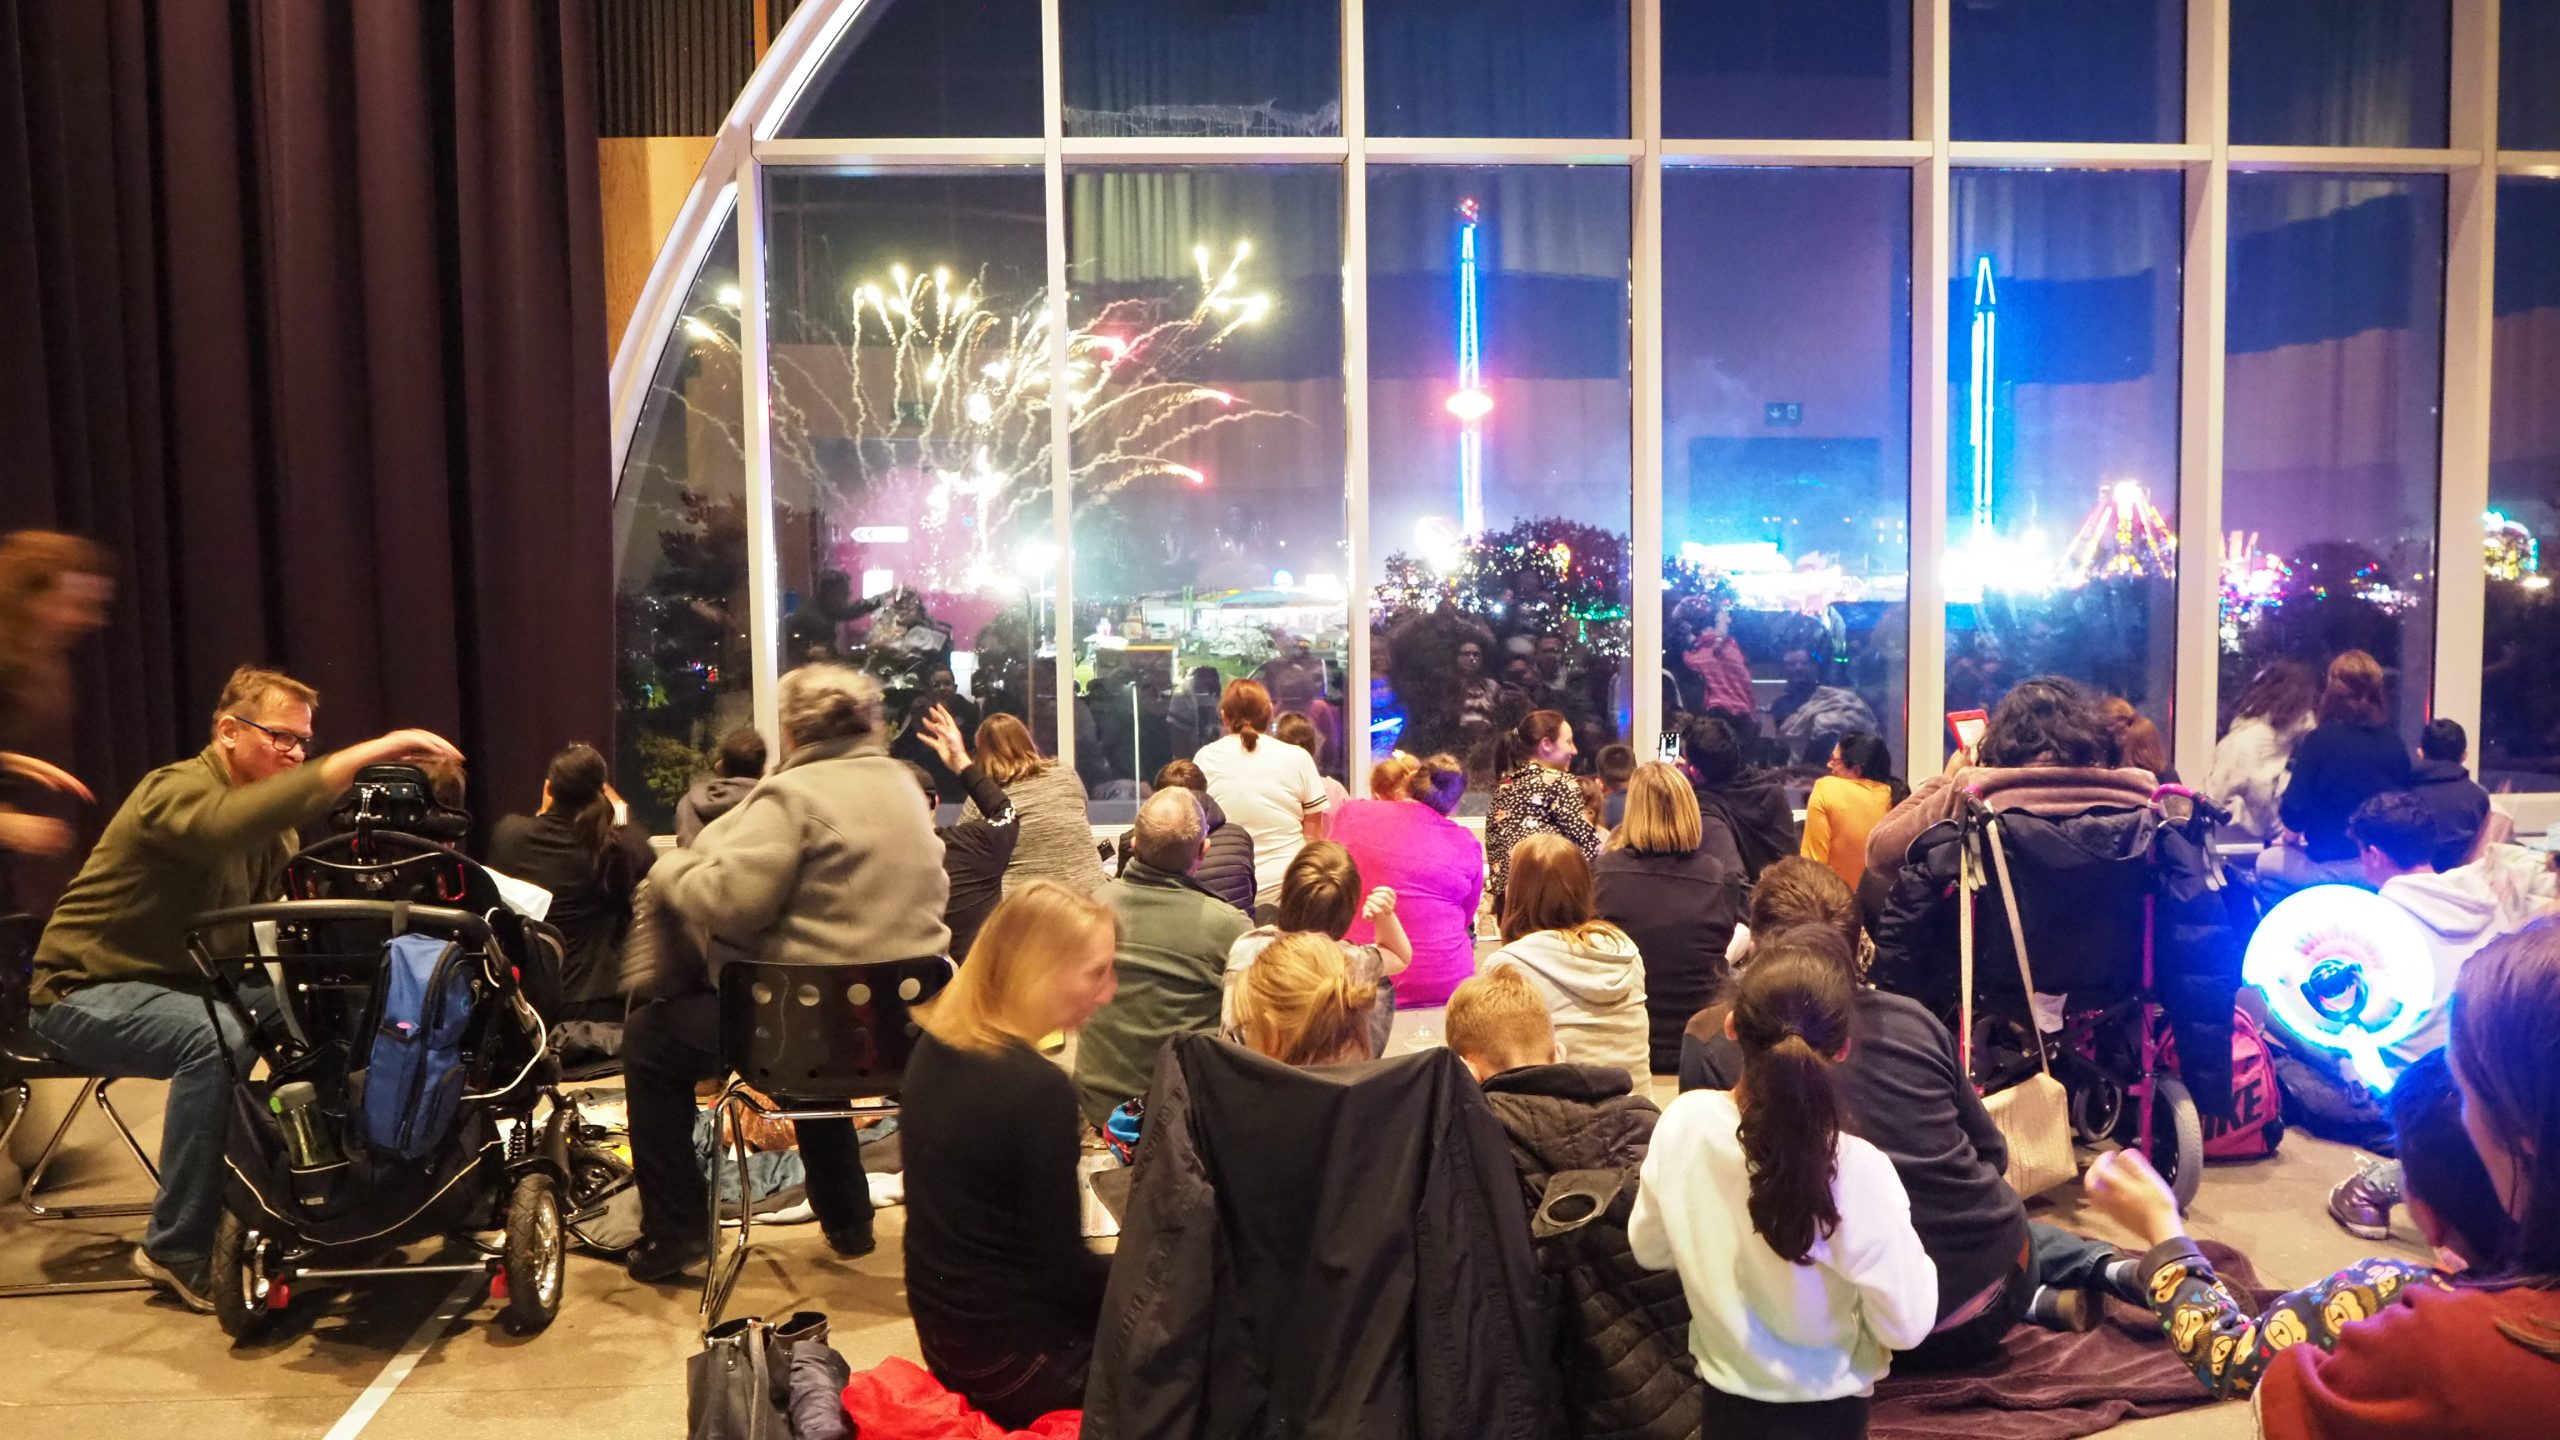 Families in the Sky Room watching out the window at the fireworks display